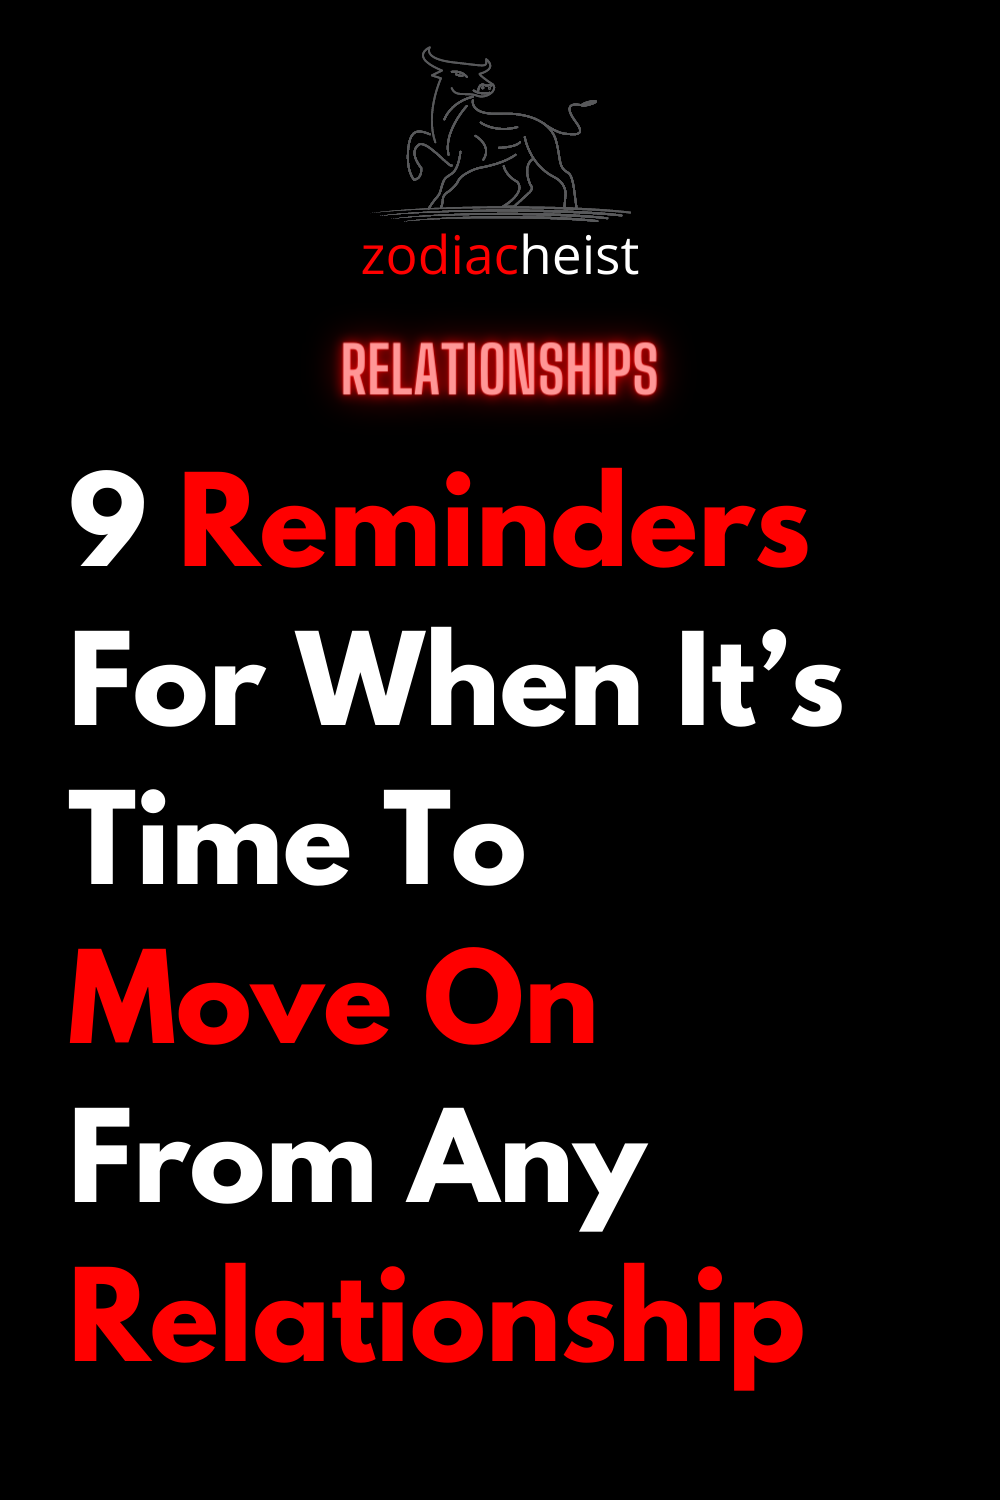 9 Reminders For When It’s Time To Move On From Any Relationship